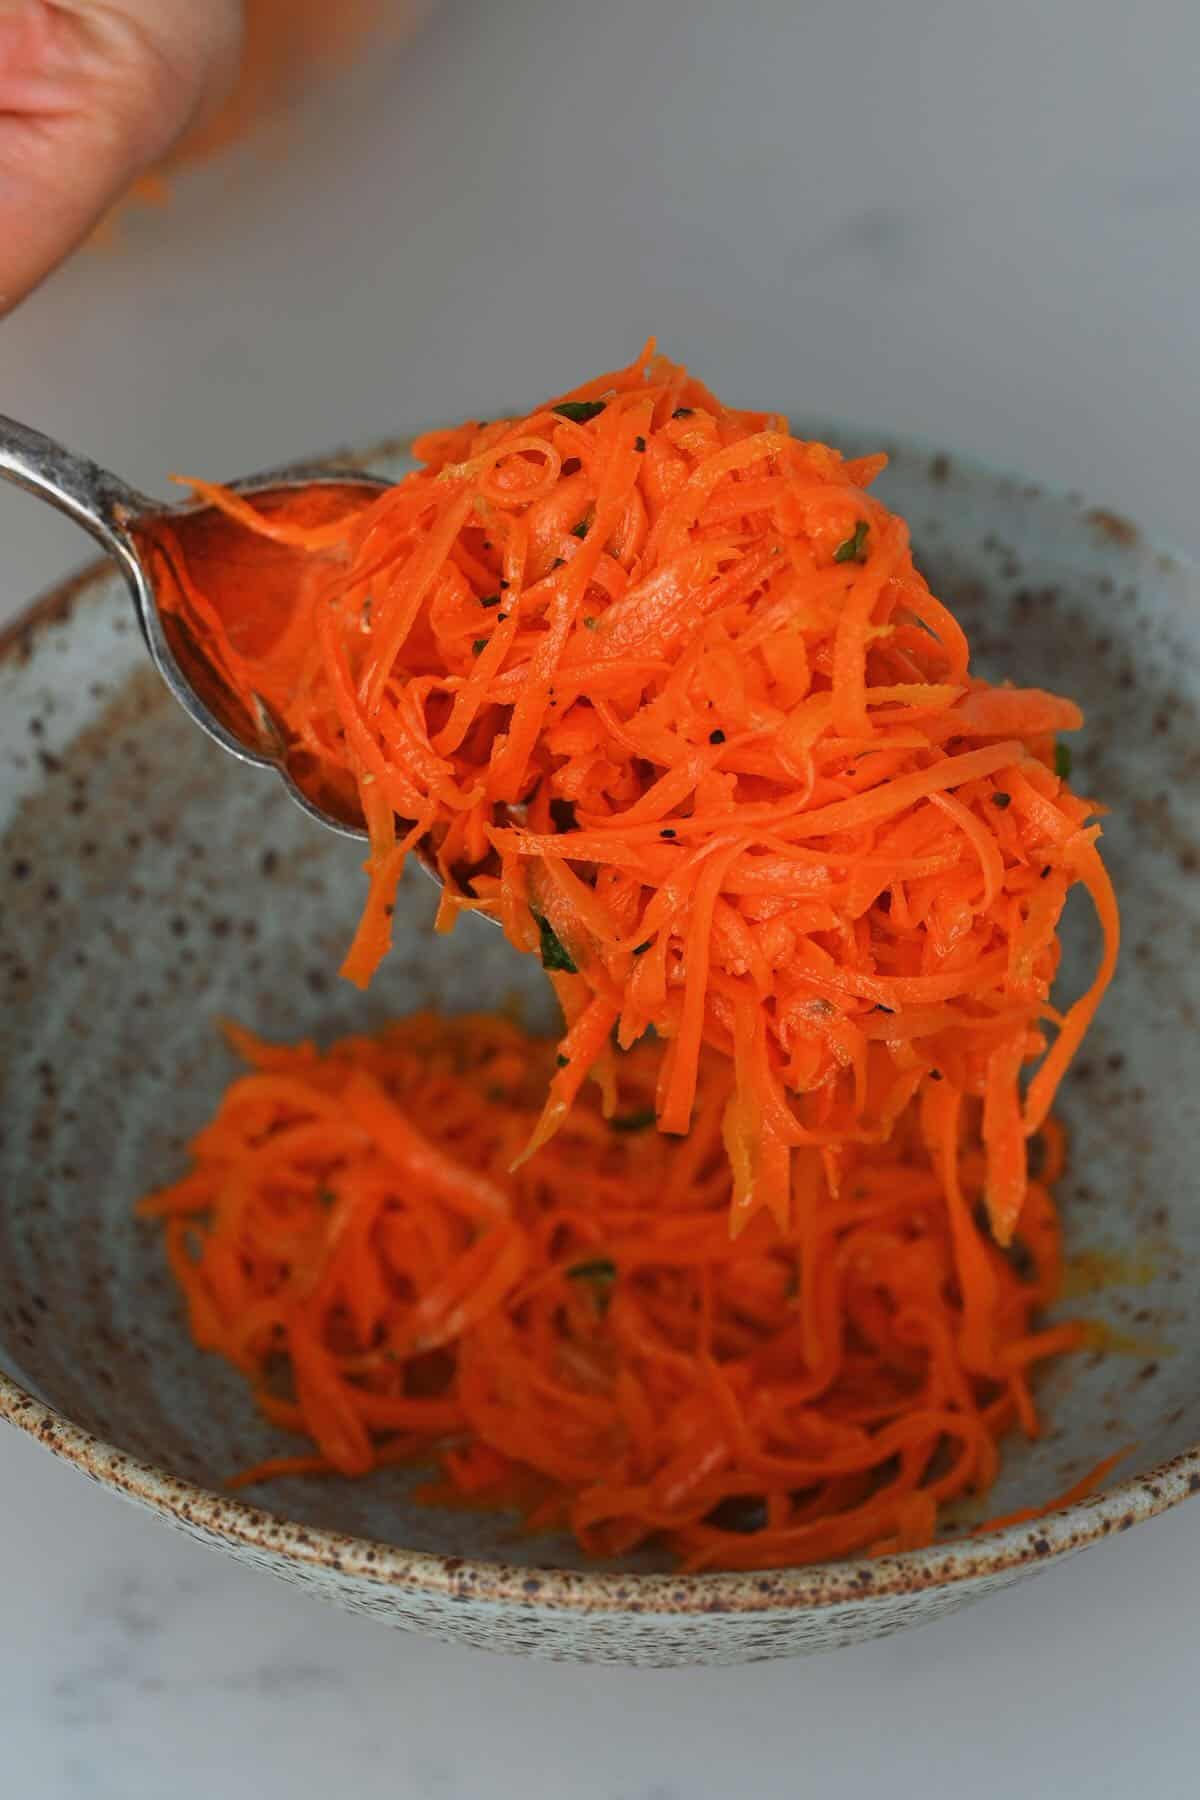 Serving carrot salad in a bowl